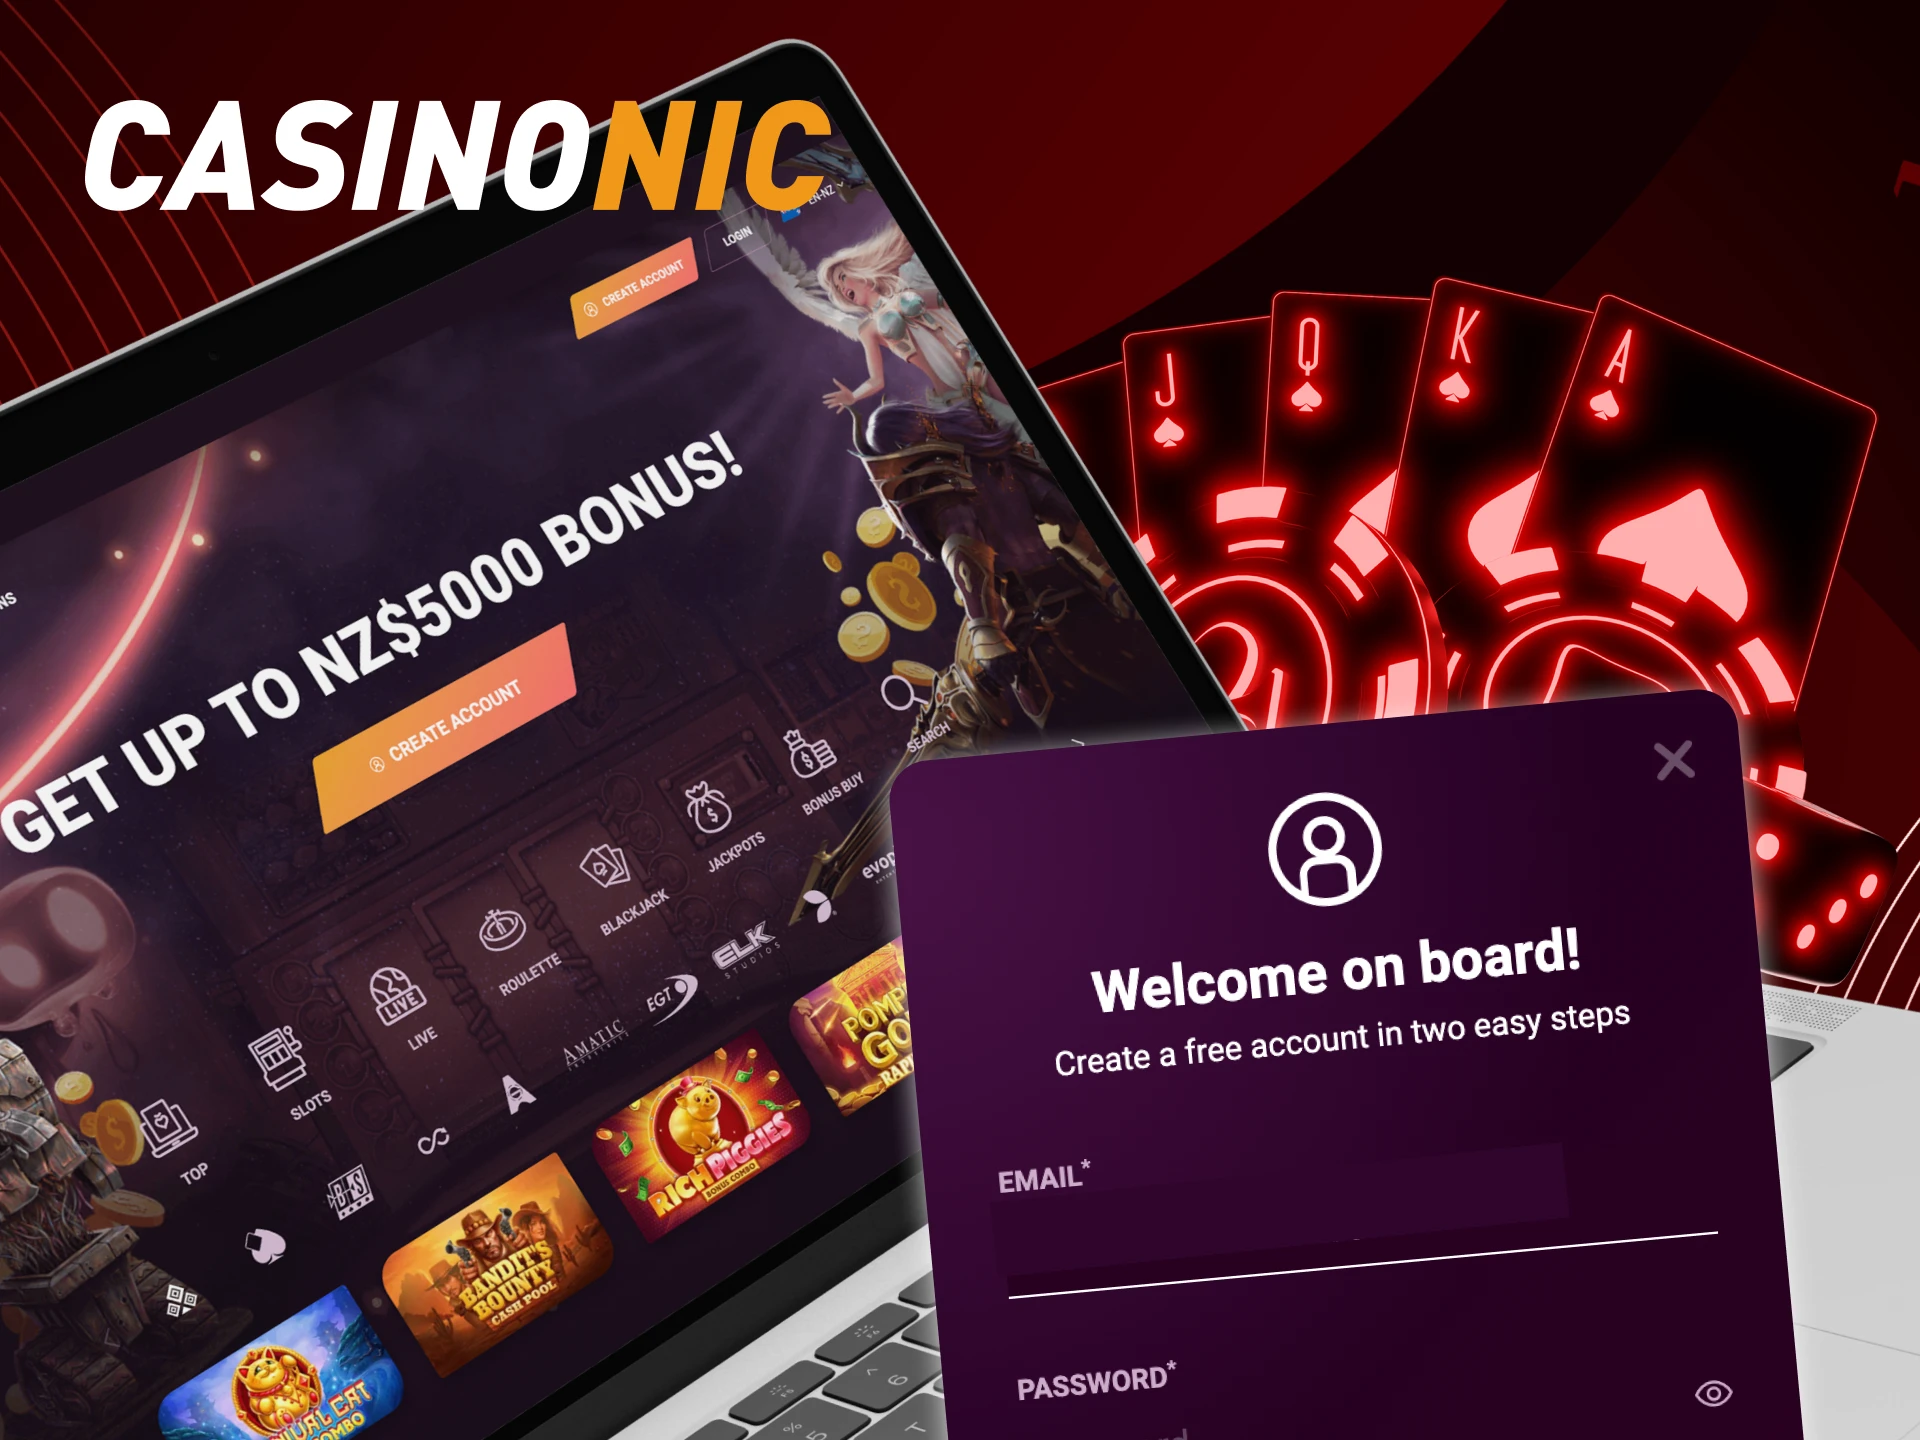 Step-by-step instructions for players on how to place bets in online casino CasinoNic.